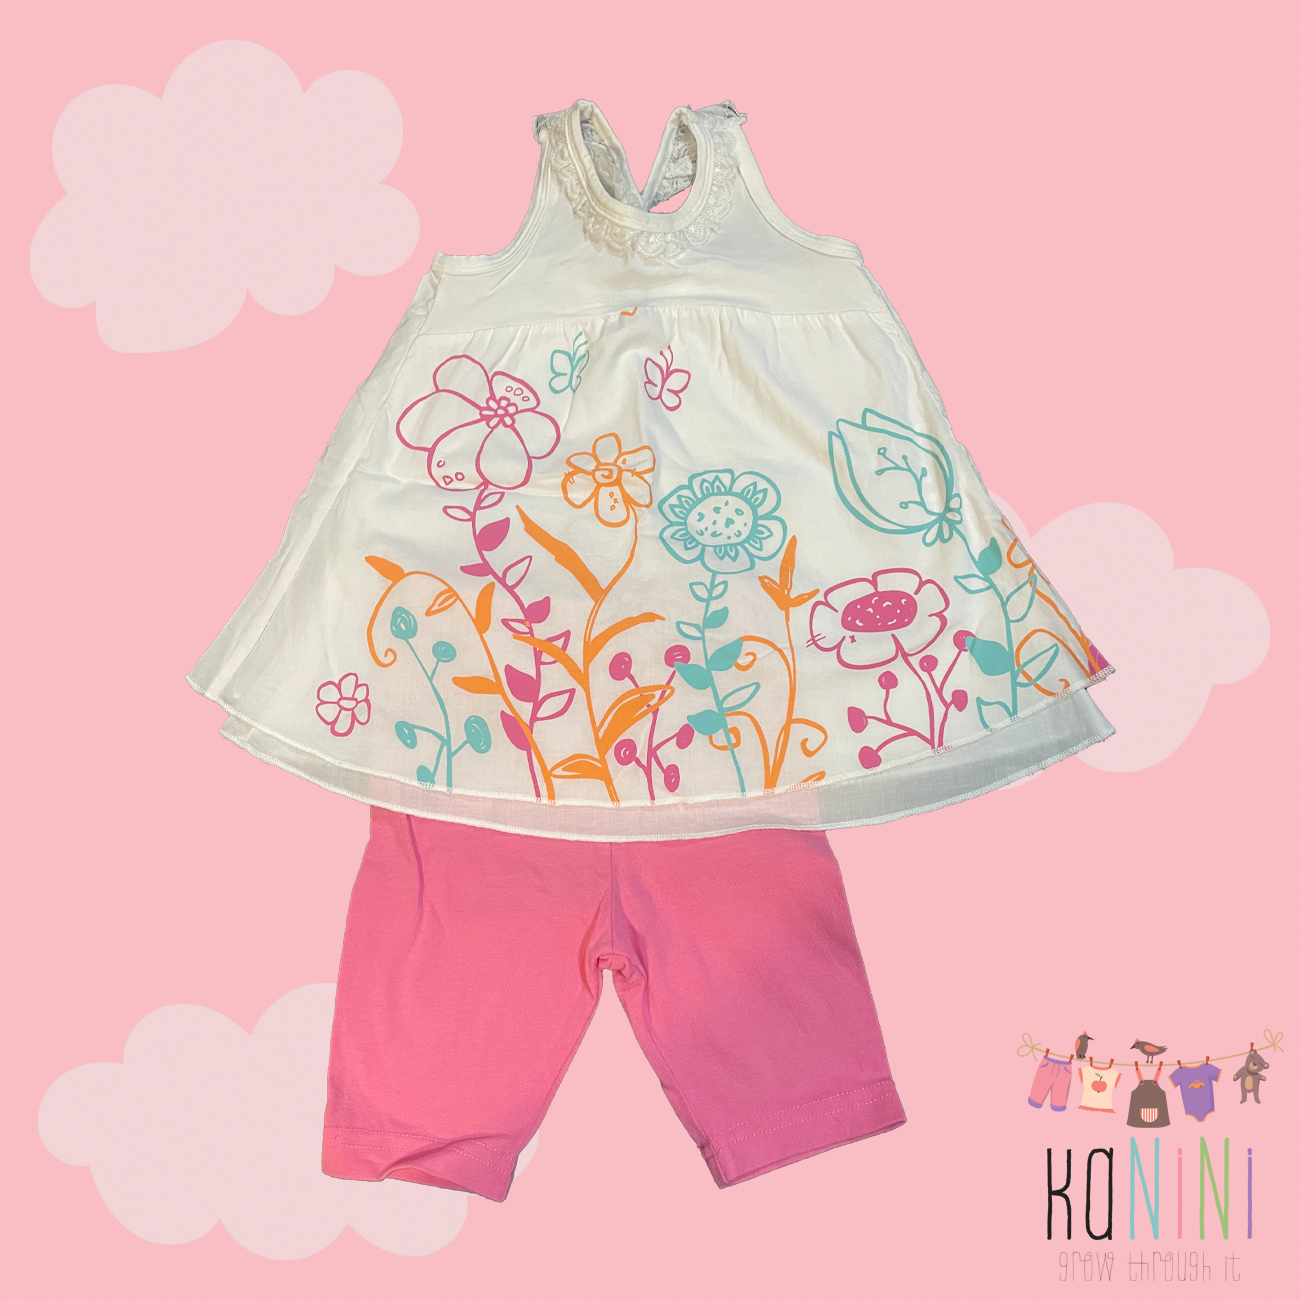 Featured image for “Keedo 6 - 9 Months Girls Flower Top & Leggings”